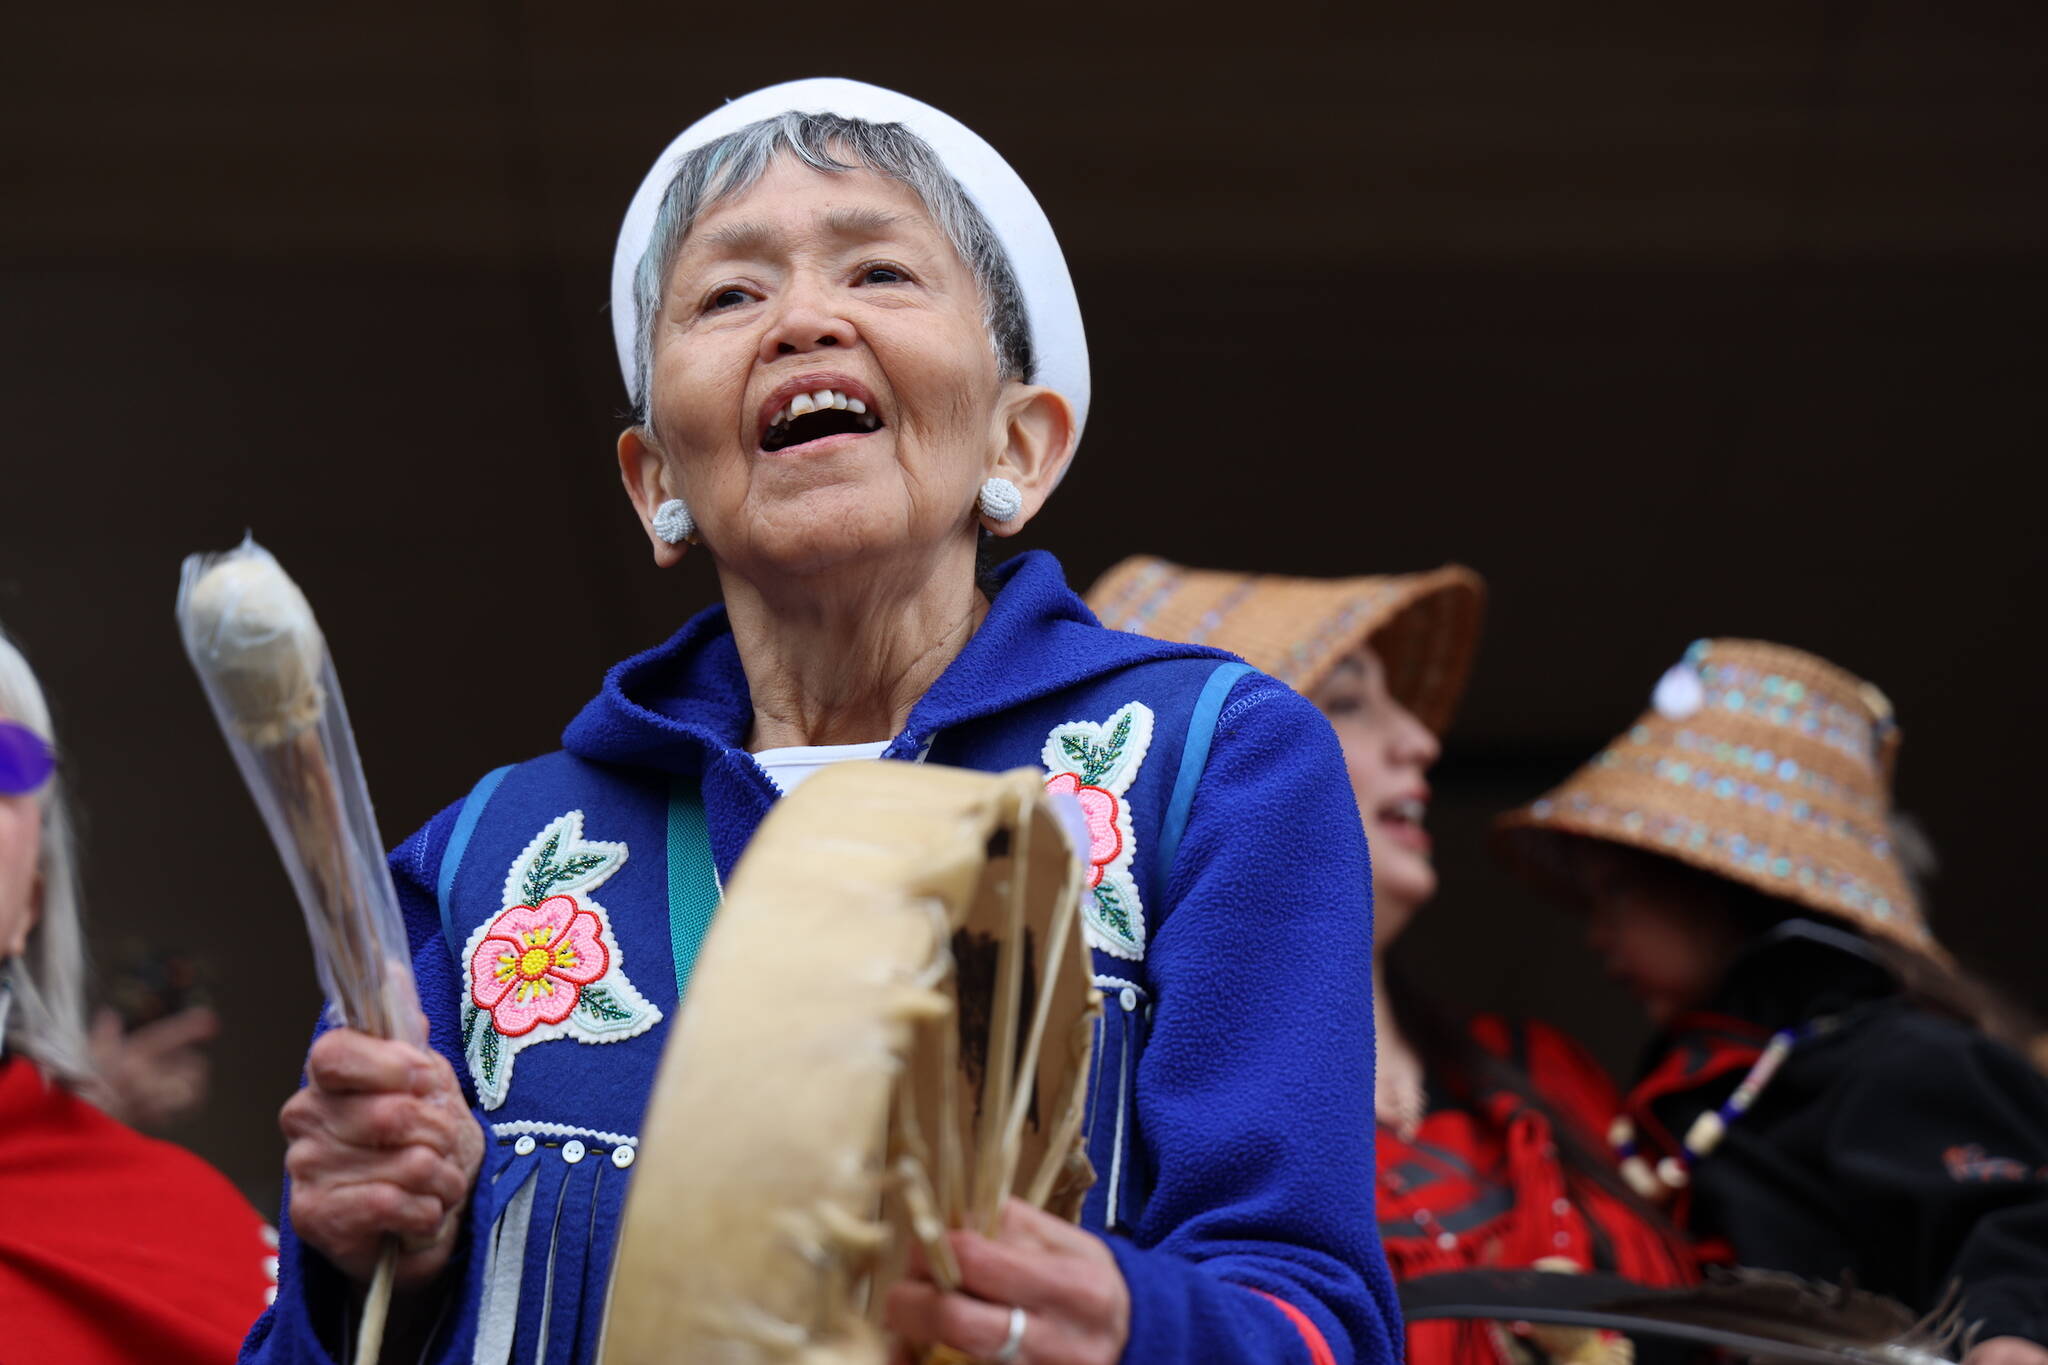 Sharon Lee drums to a song during the procession of the dedication ceremony of the Kootéeyaa Deiyí, Totem Pole Trail, held Saturday in downtown Juneau at Heritage Plaza. (Clarise Larson / Juneau Empire)